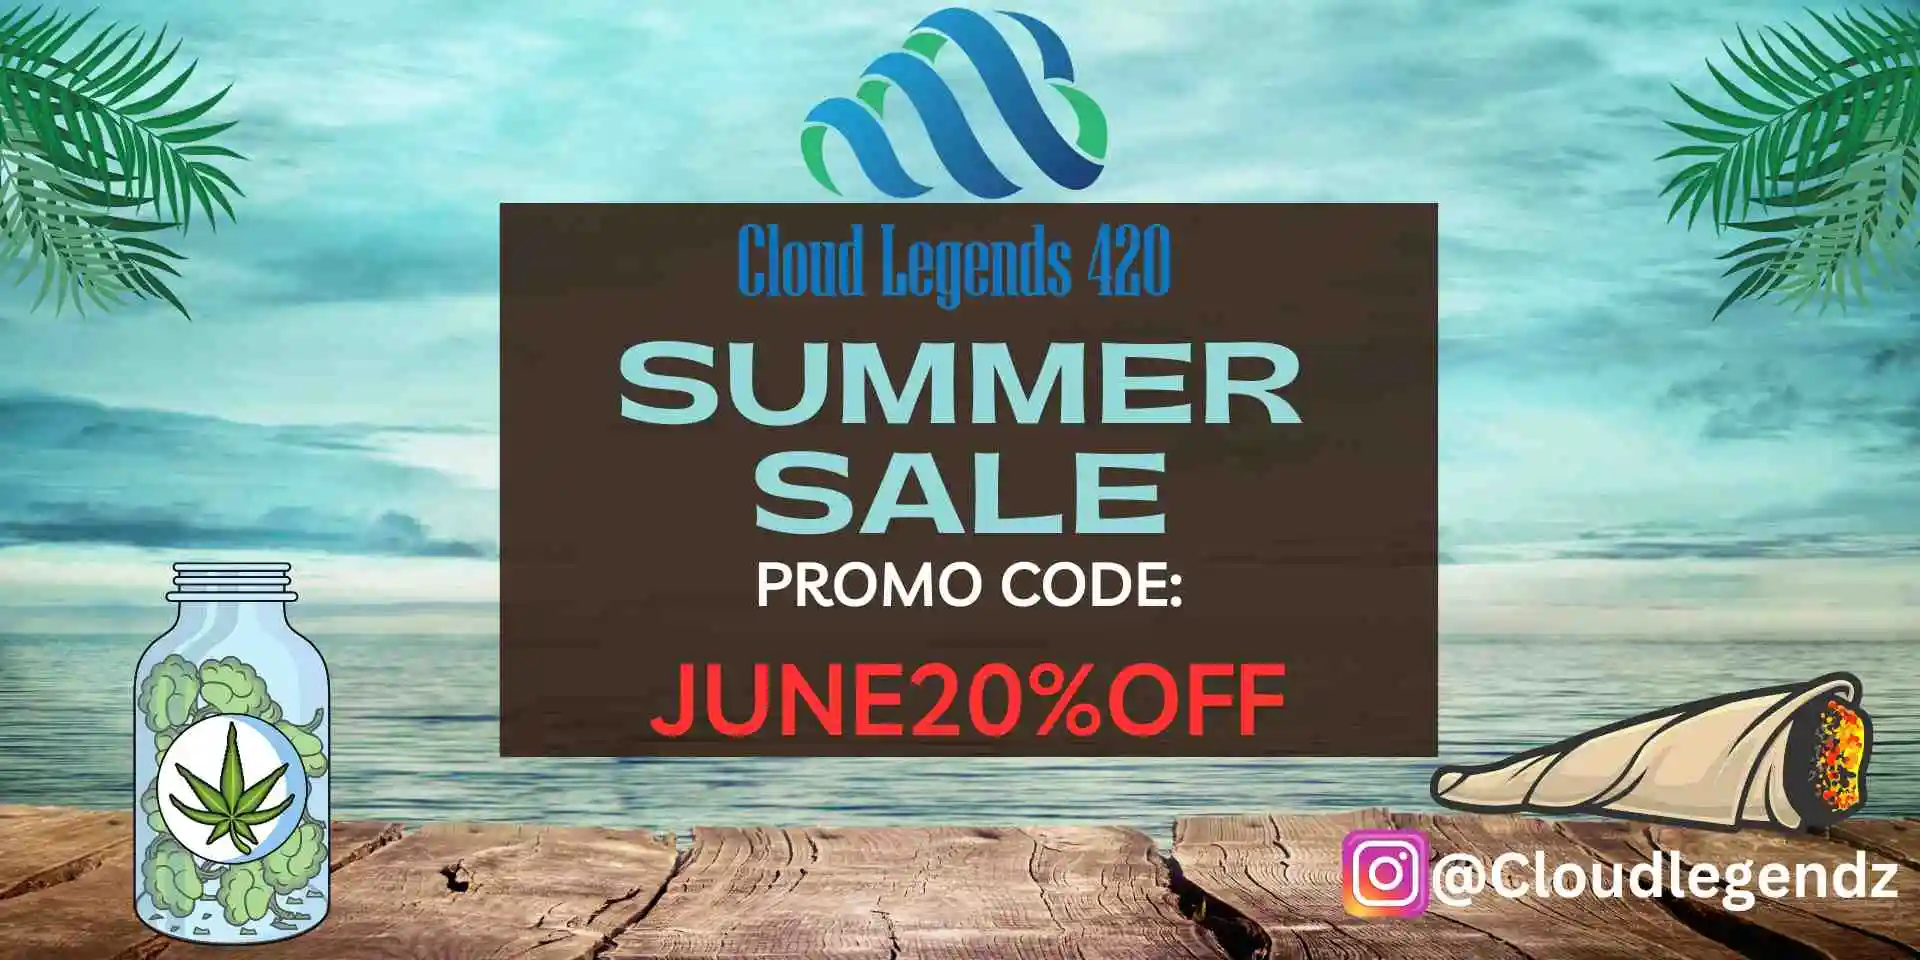 Summer Sale Banner with Promo code from Cloud Legends 420